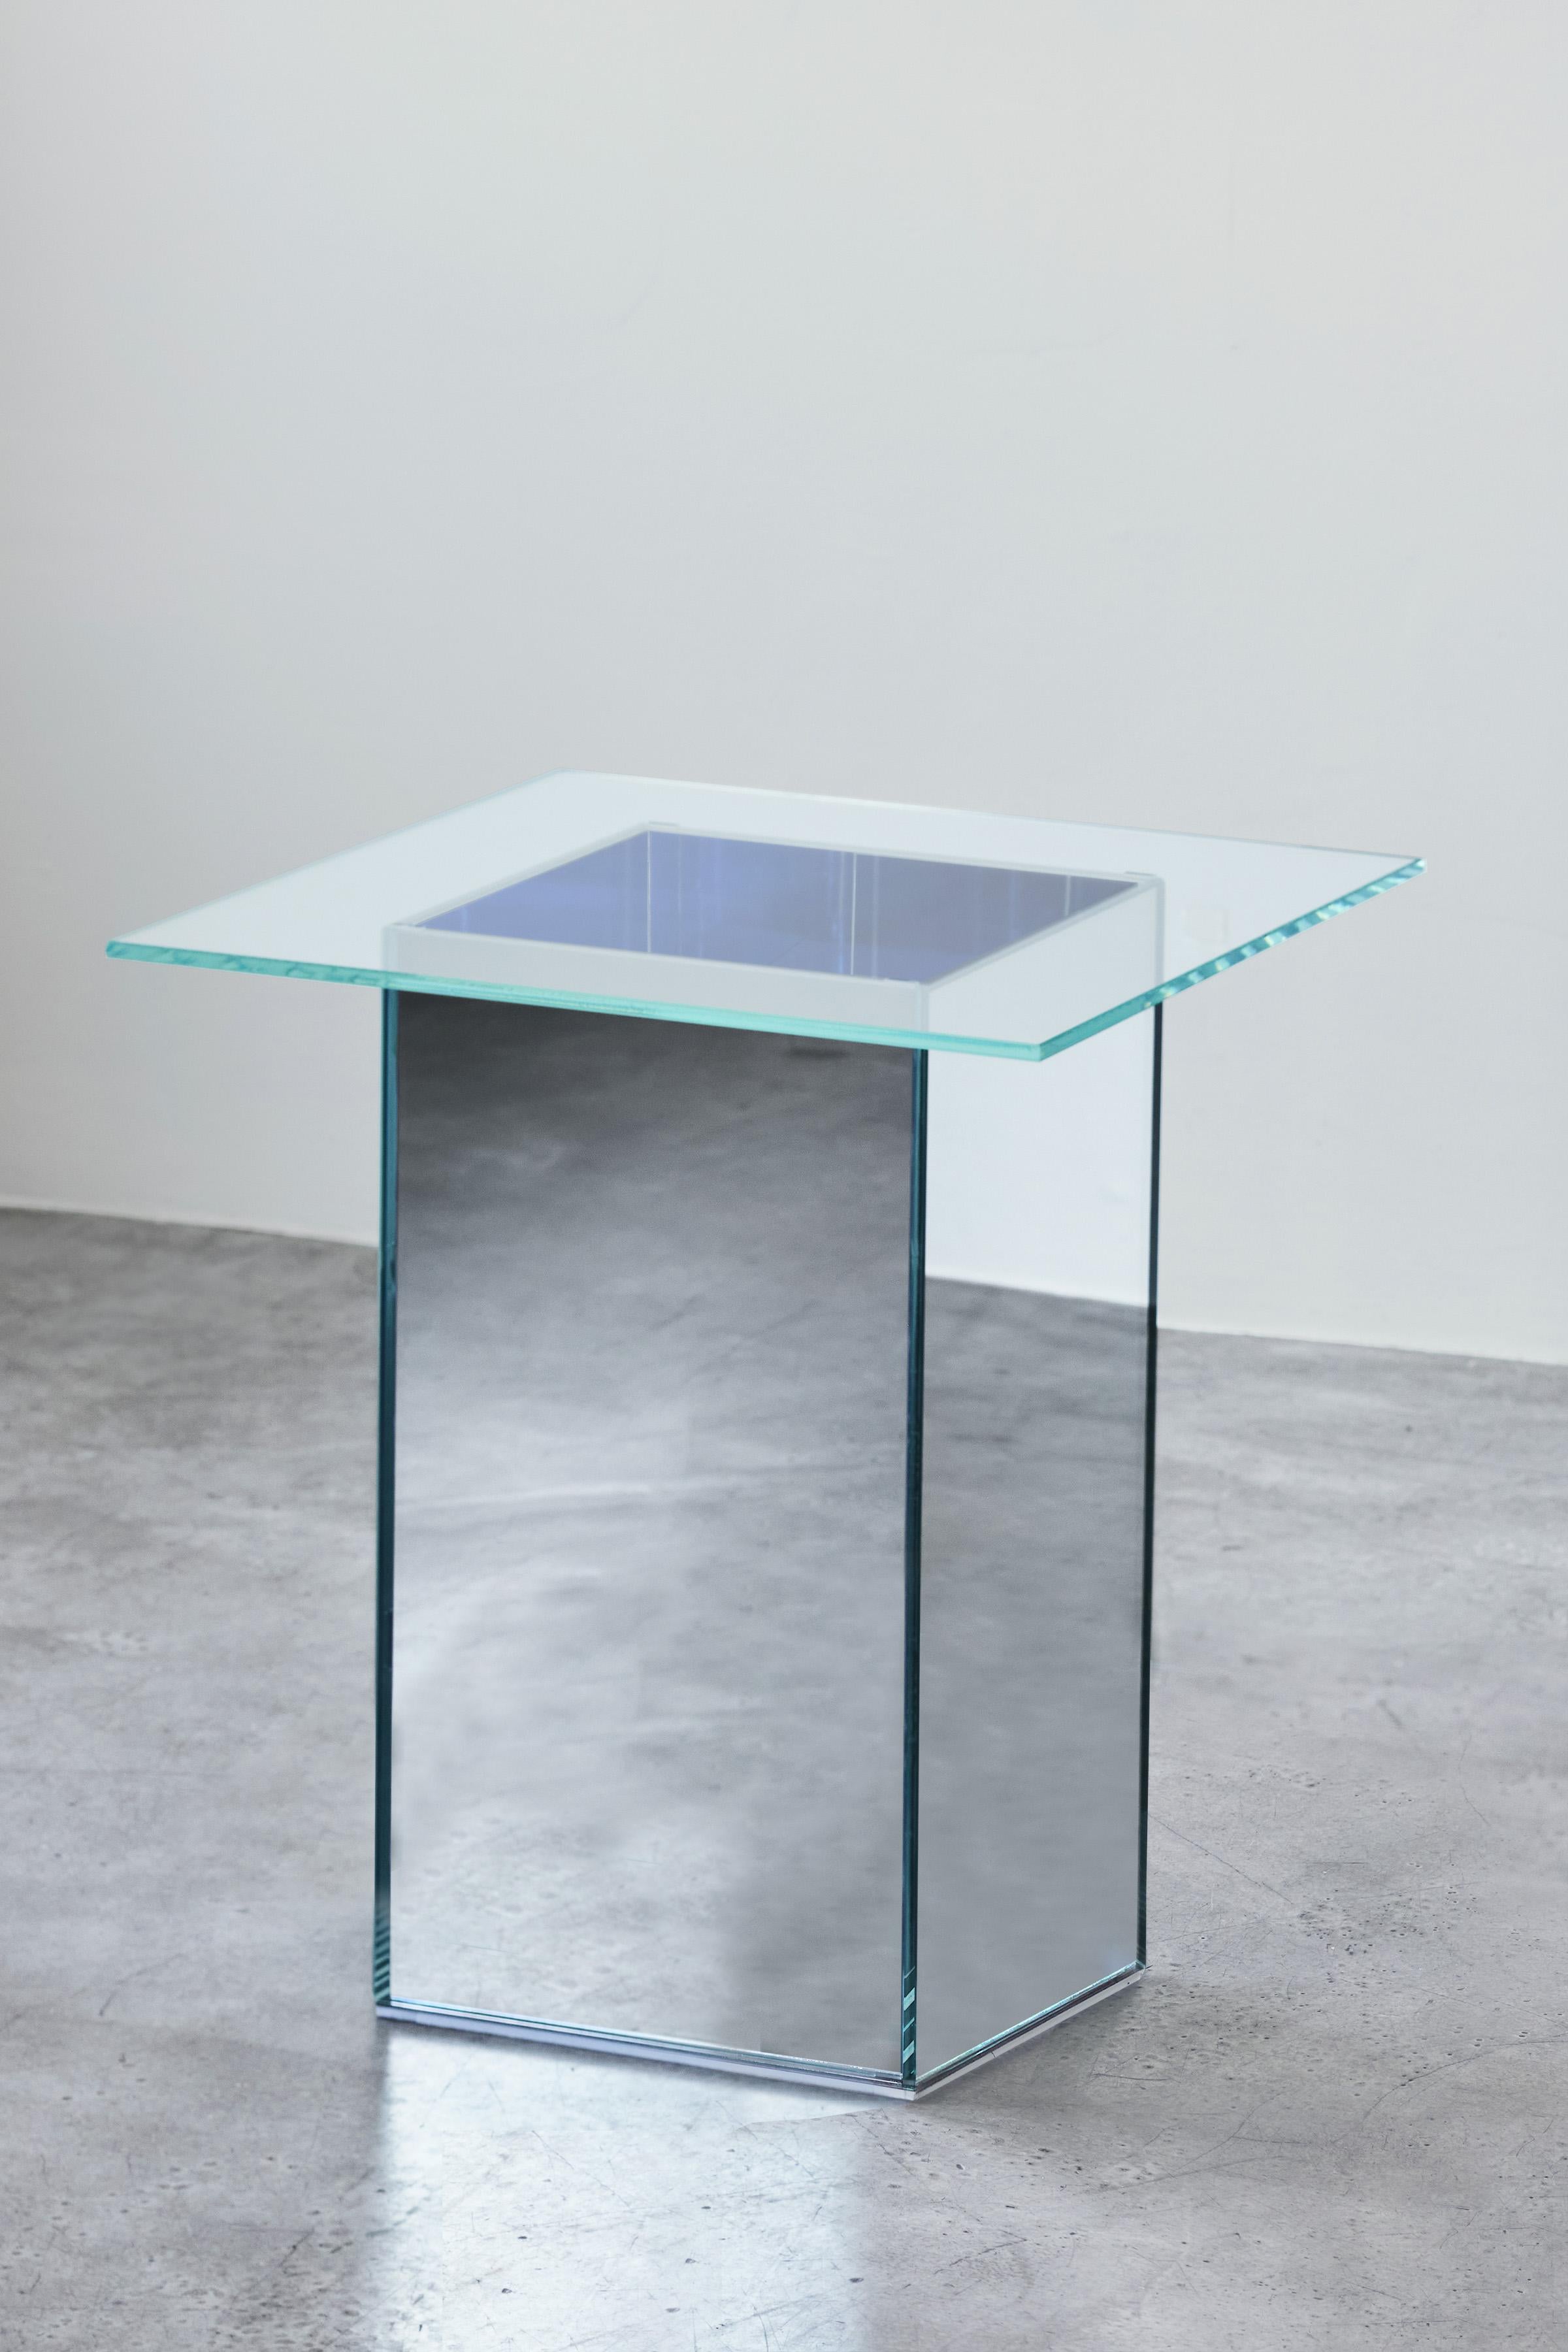 VIEW Tea Table is part of a five-piece collection of sculptural glass and mirror furniture seeking to bring interactive views into objects and furniture. VIEW Tea Table is made from ultra-clear low-iron glass and mirrored glass base. While furniture